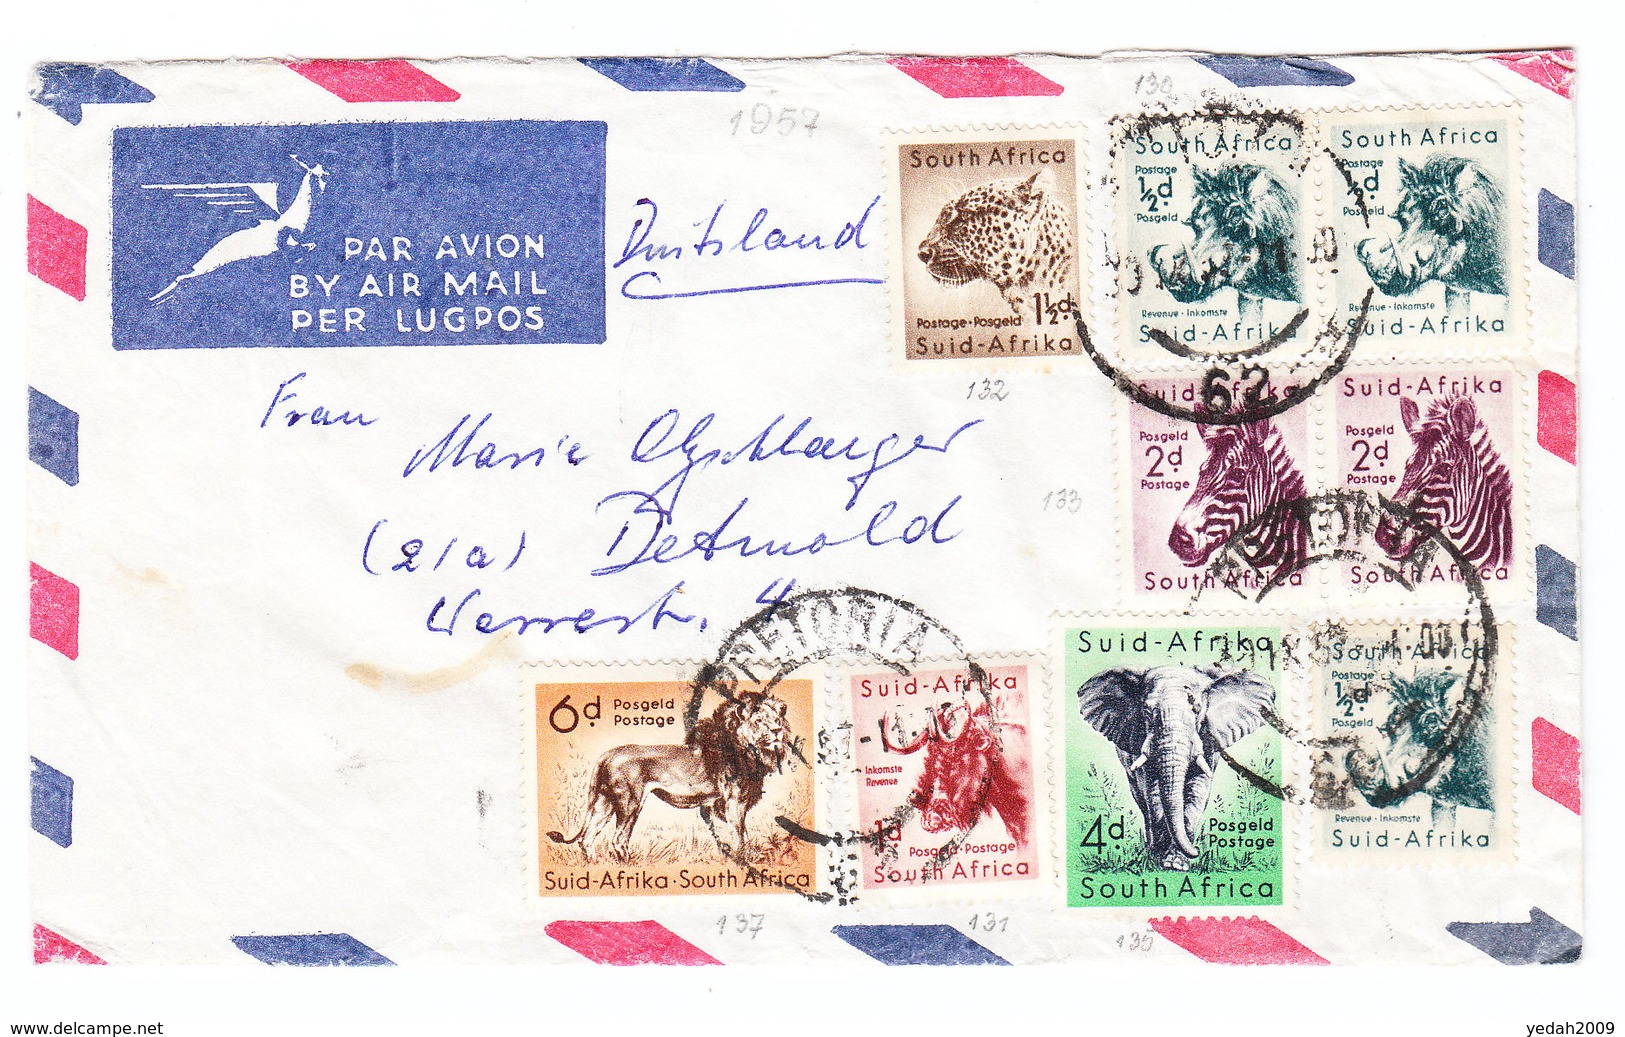 South Africa AIRMAIL COVER TO Germany 1957 - Luftpost